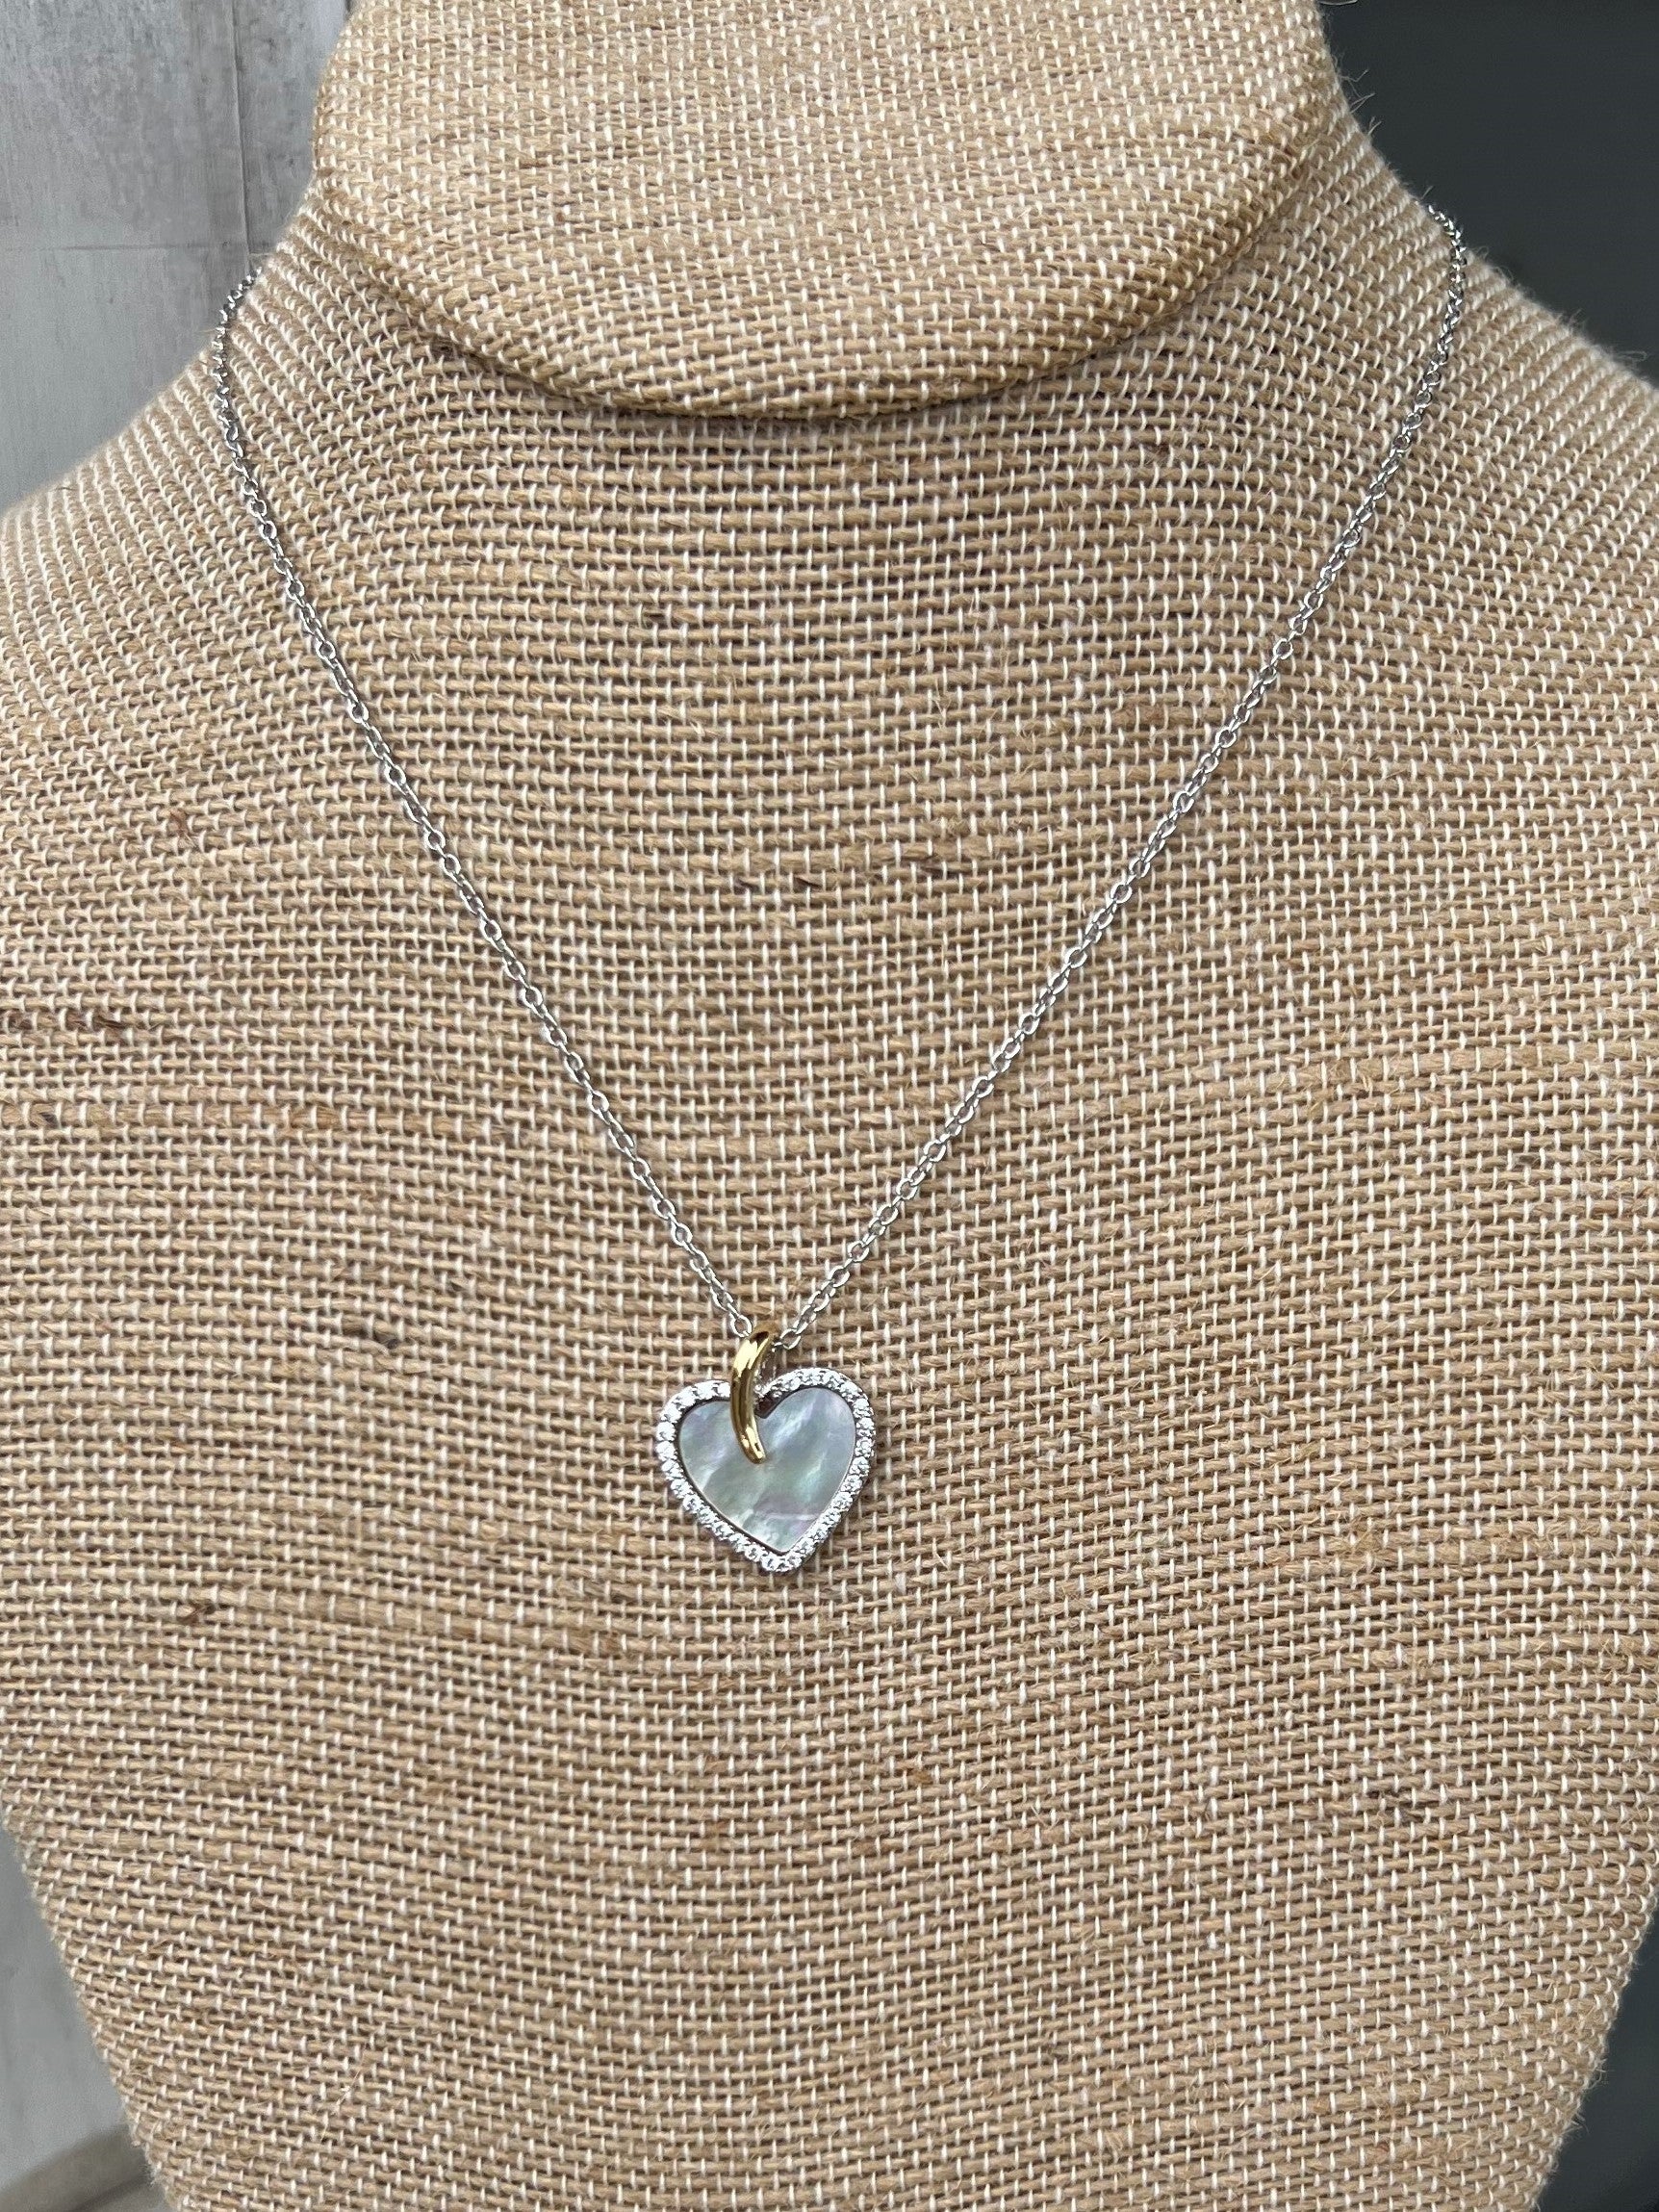 Such a beautiful, dainty necklace, approximately 16-18" in length. The front is a solid silver heart, outlined in rhinestones. The back is outlined in silver with several small hearts in the middle - you can wear it either way! Great for Valentines!